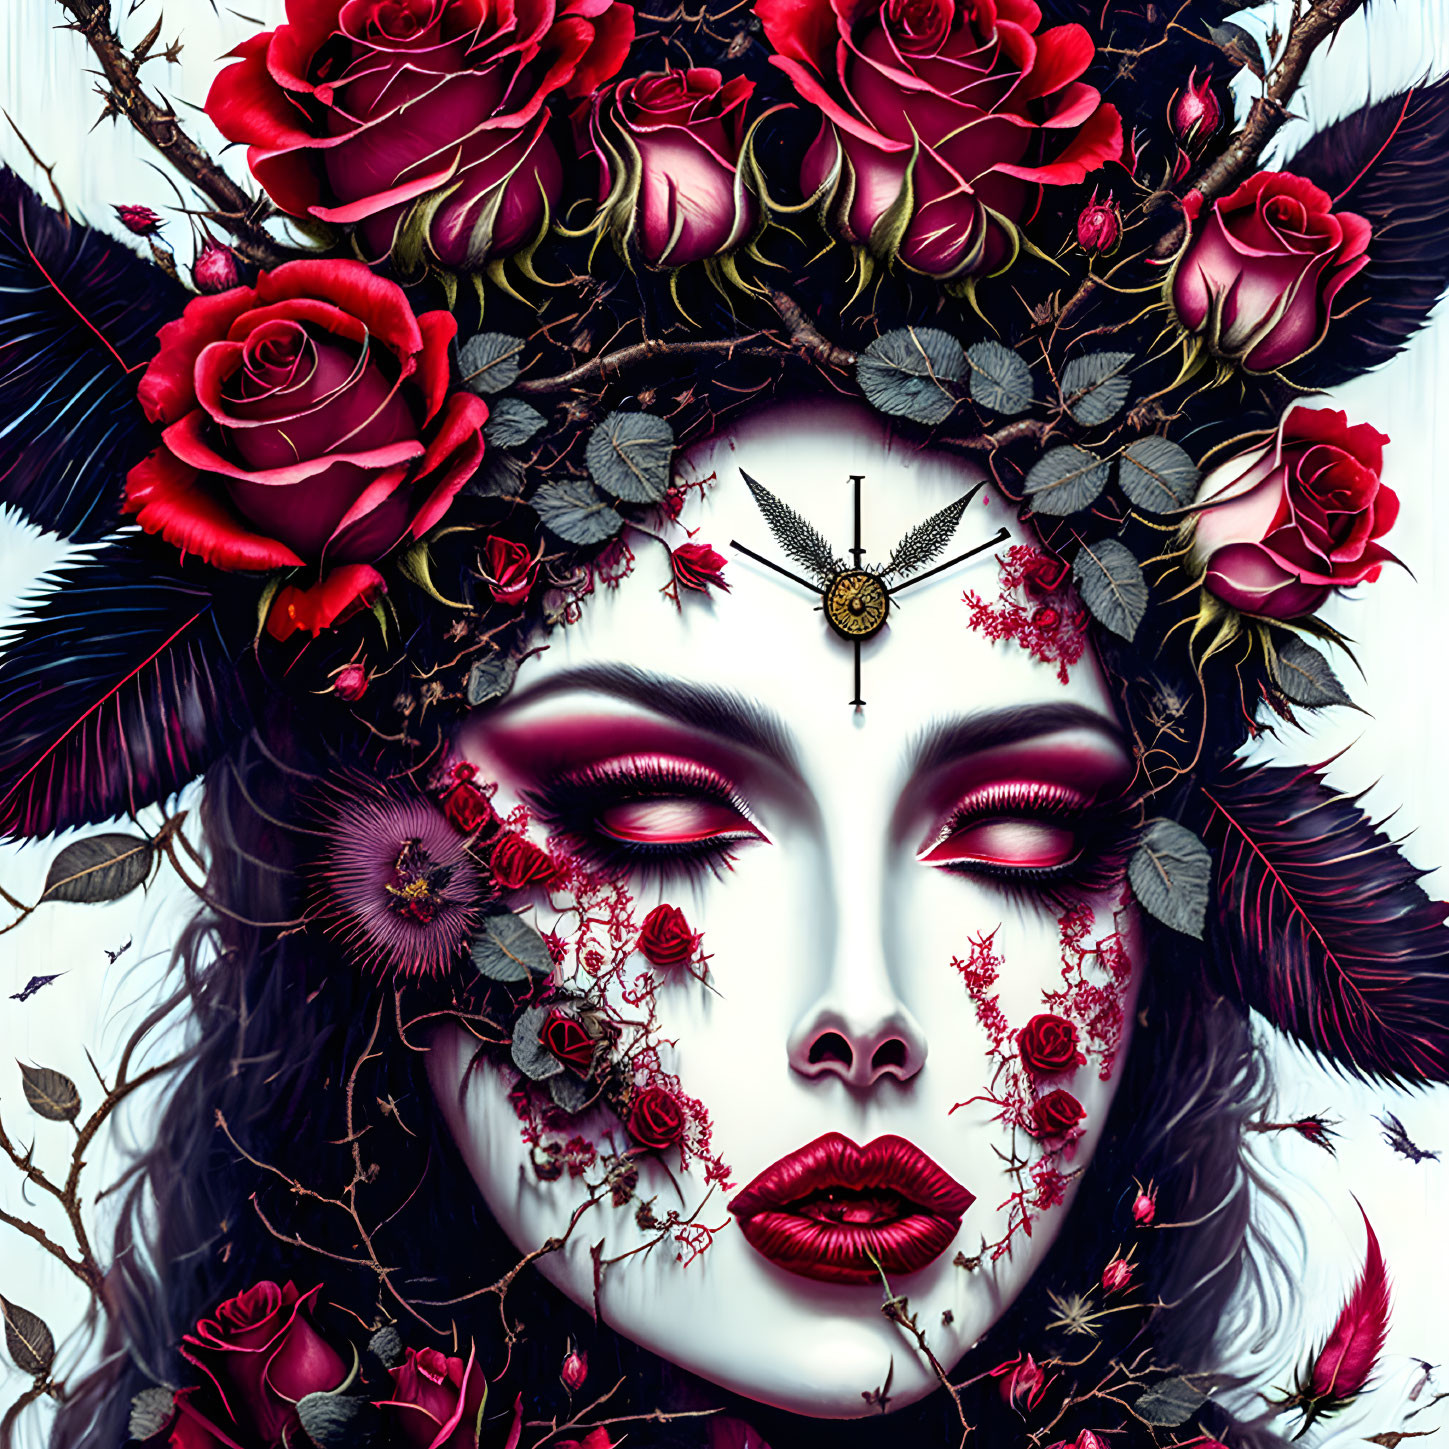 Digital Artwork: Woman with Floral and Skeletal Makeup, Roses, Feathers, Compass